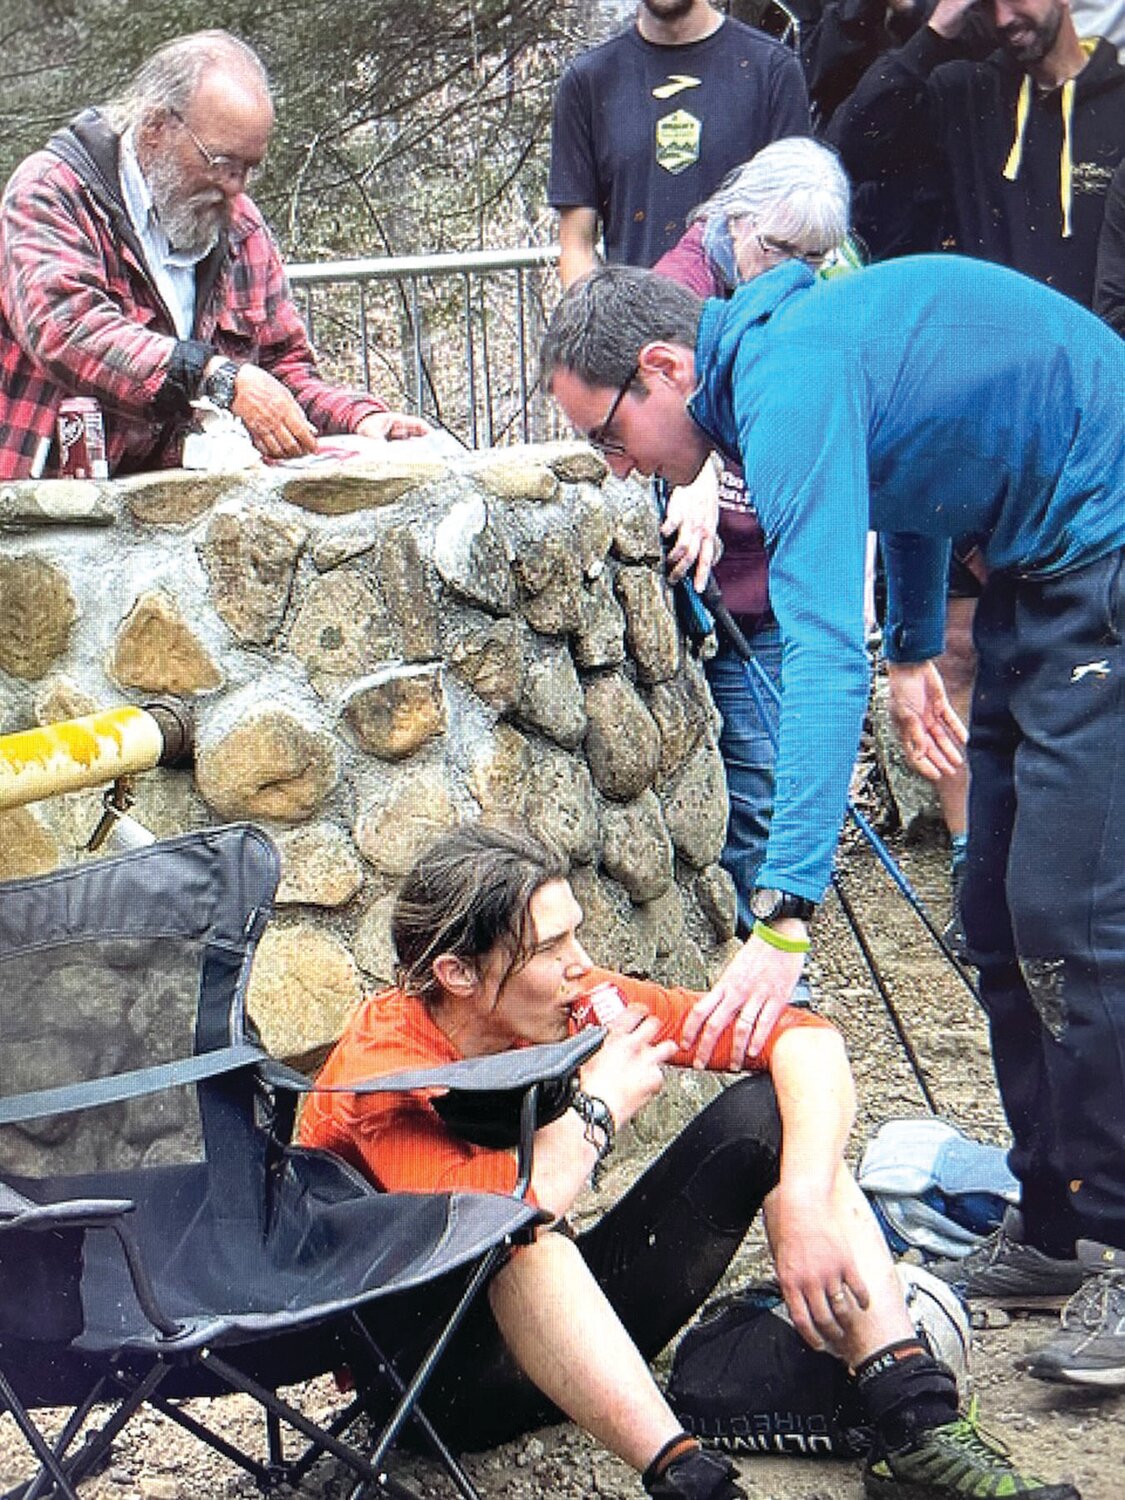 Jasmin Paris of Great Britain recovers just after becoming the first female runner to ever complete the 100-mile Barkley Marathons under the 60-hour time limit last Friday.